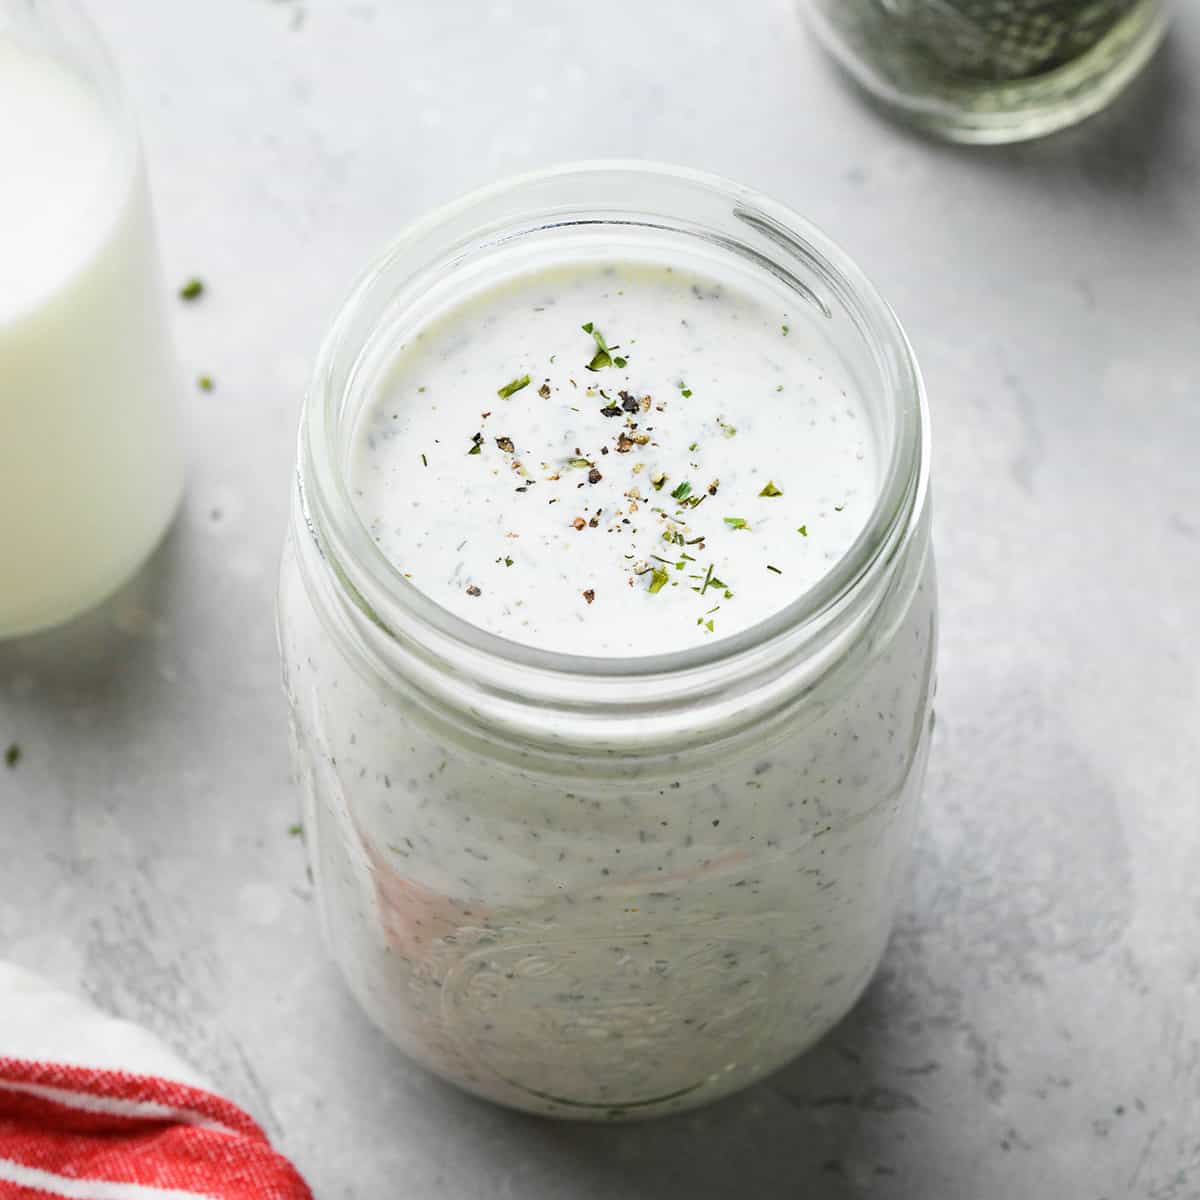 a glass jar of ranch dressing made with Ranch Dressing Mix